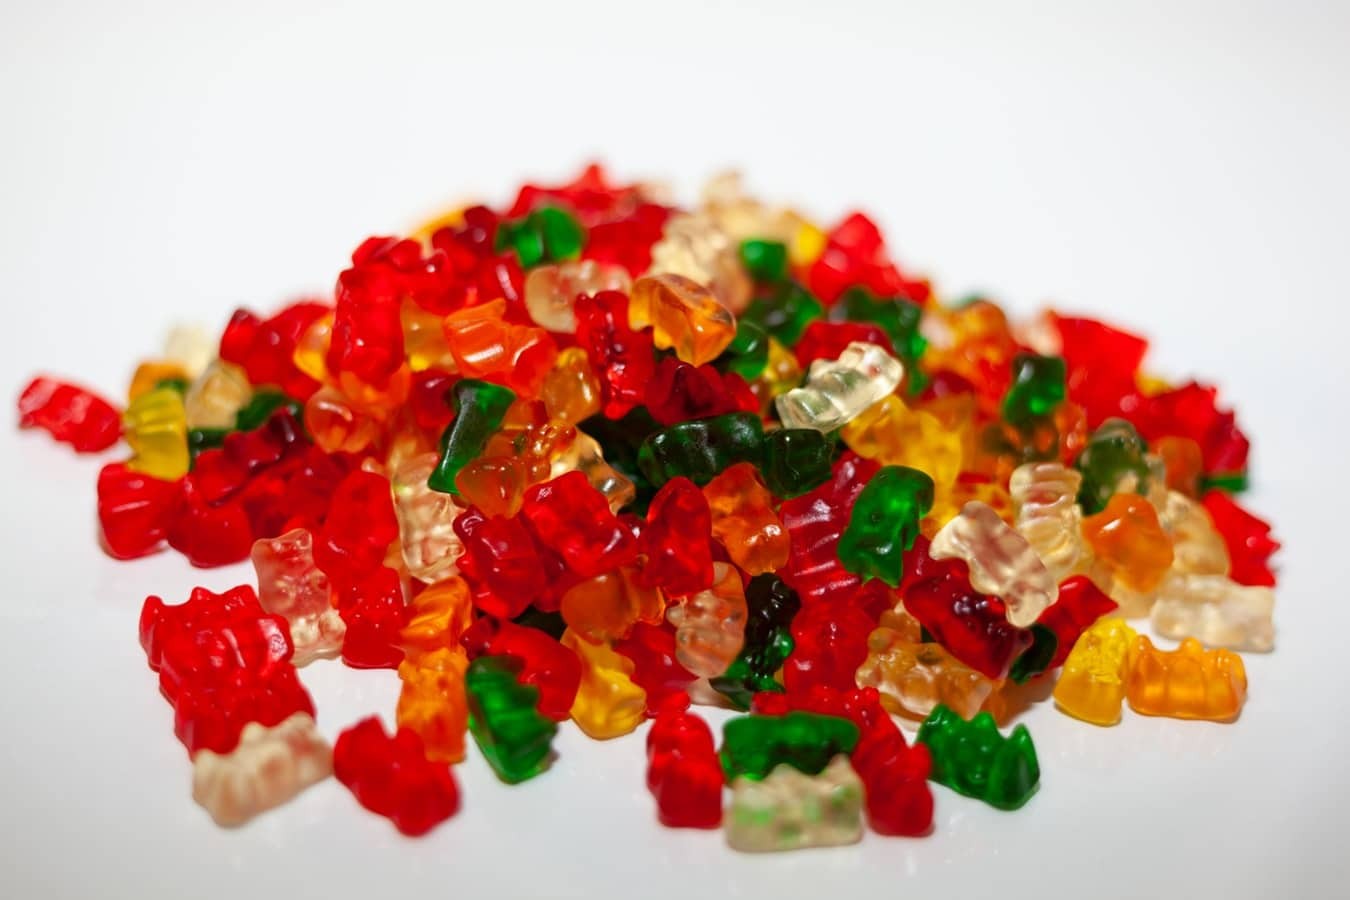 Cutting Through the Delta 10 Delights: A Gummy Goodness Novice’s Guide